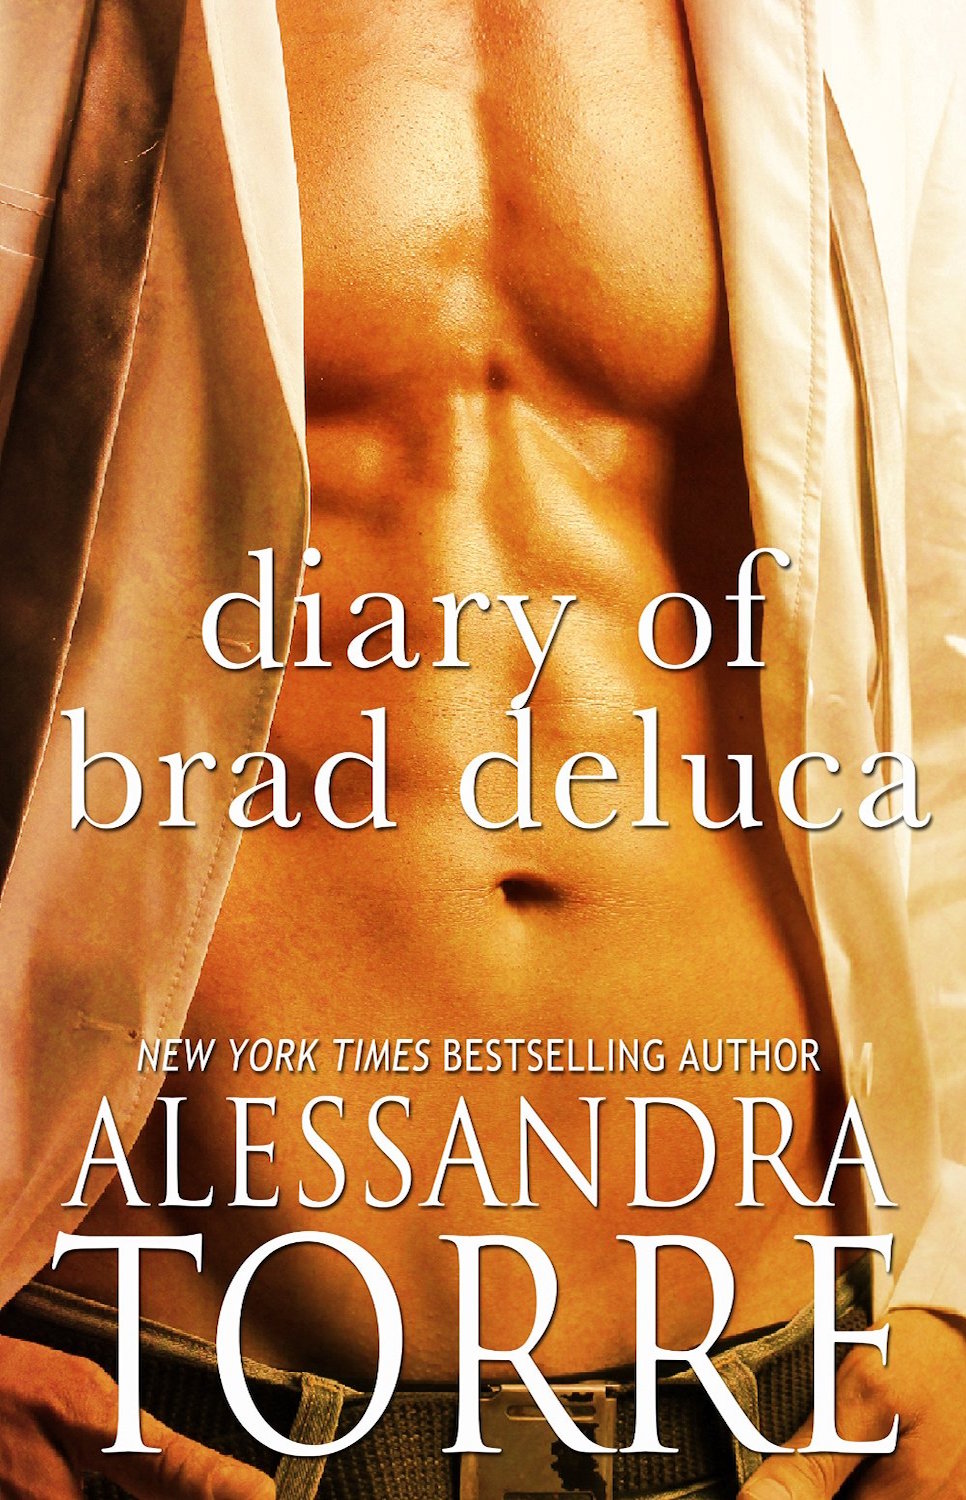 BOOK REVIEW: Blindfolded Innocence by Alessandra Torre : Natasha is a Book  Junkie